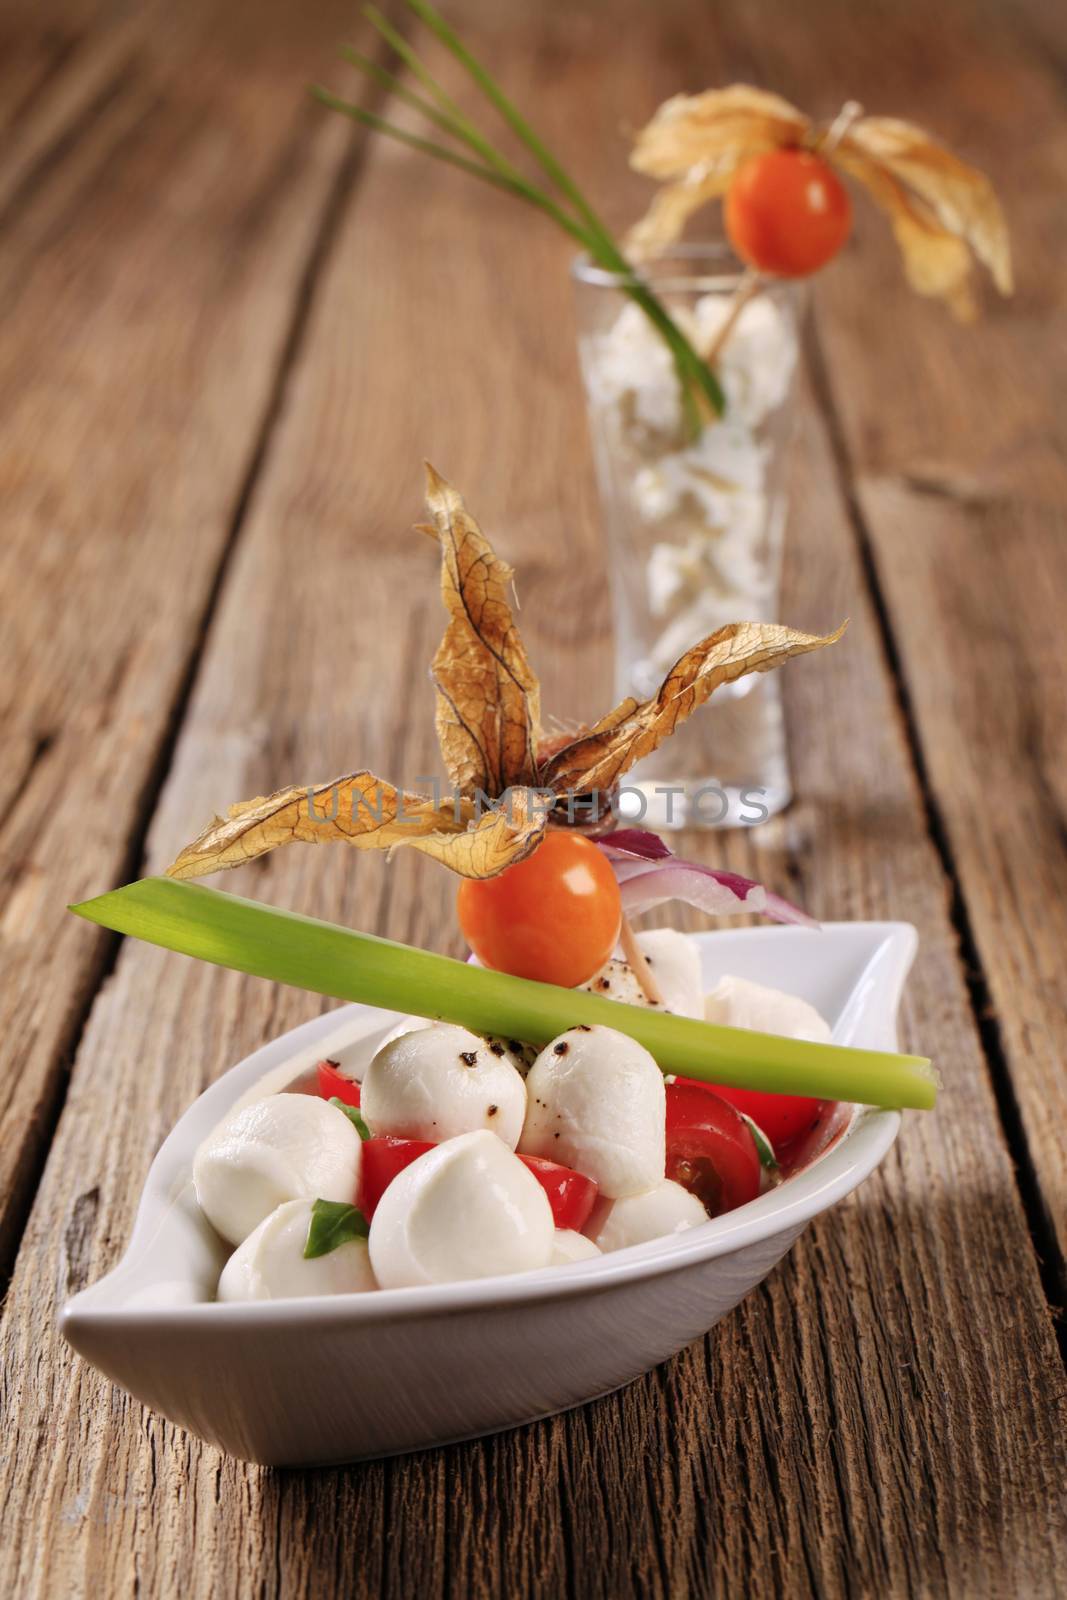 Bocconcini with tomatoes by Digifoodstock